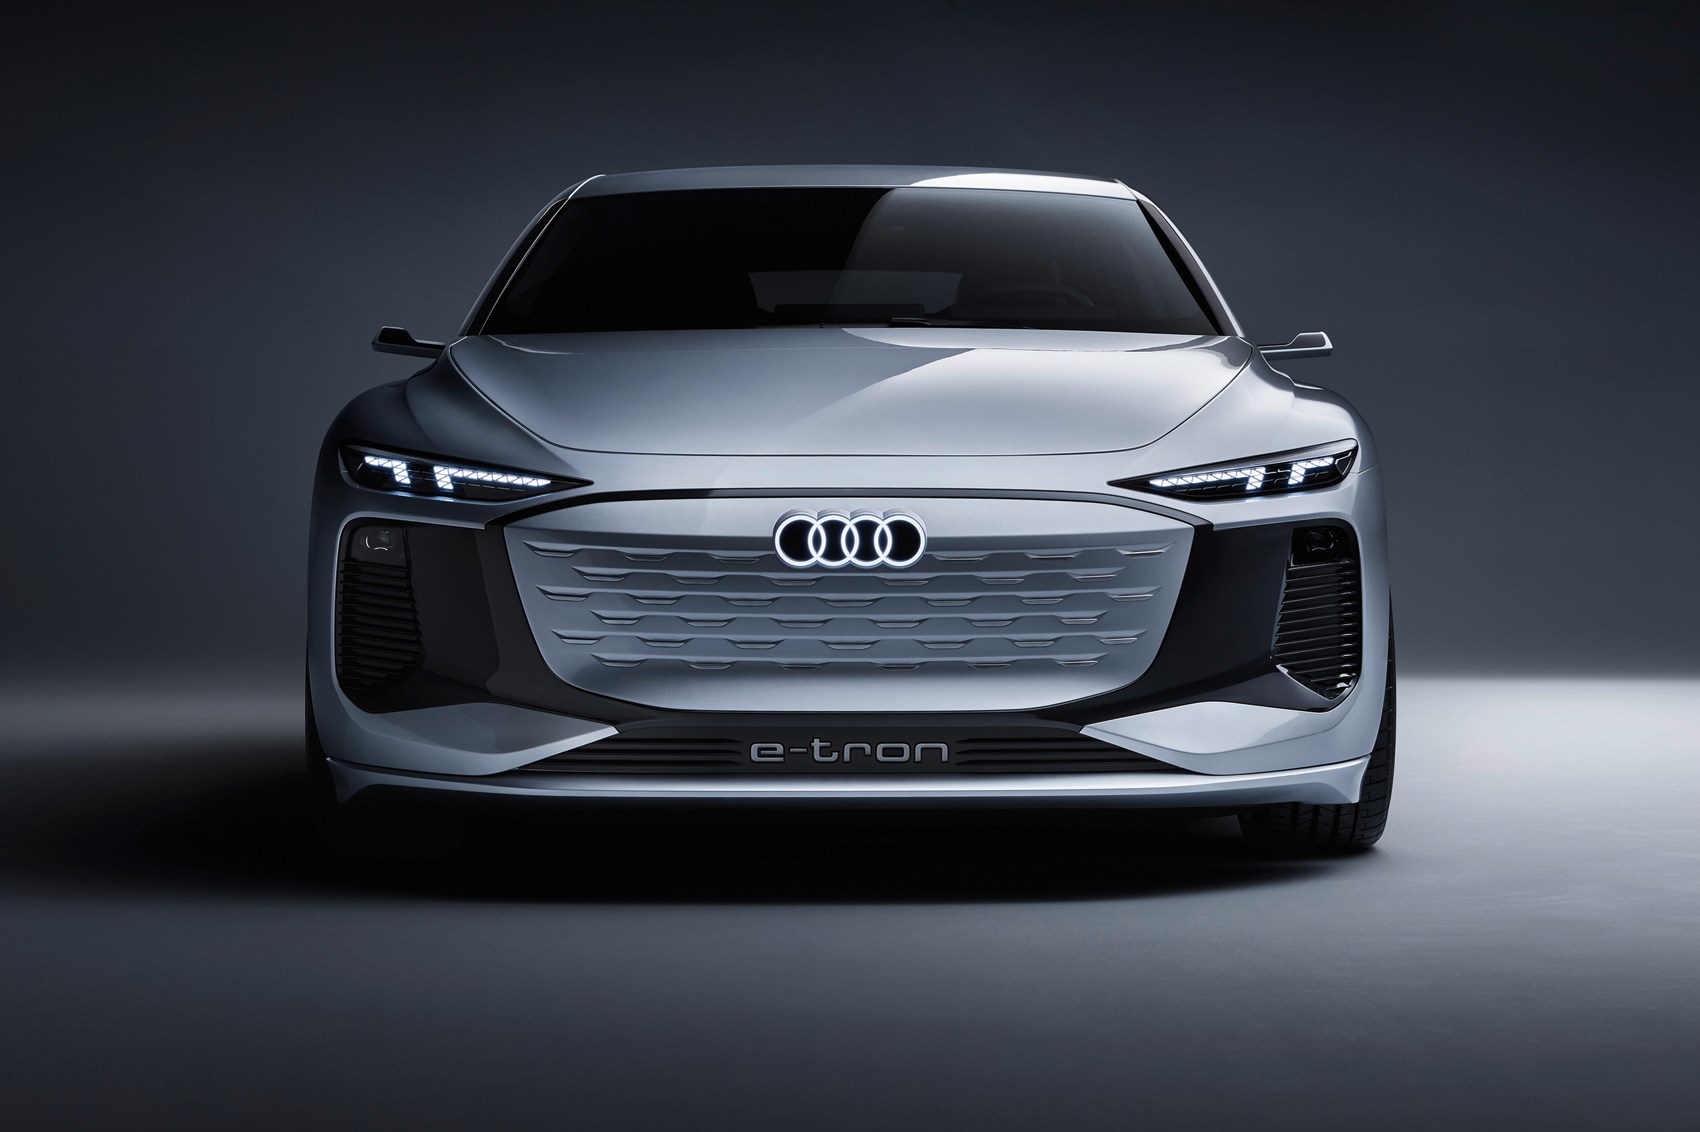 After several SUVs, Audi's next electric car is the handsome e